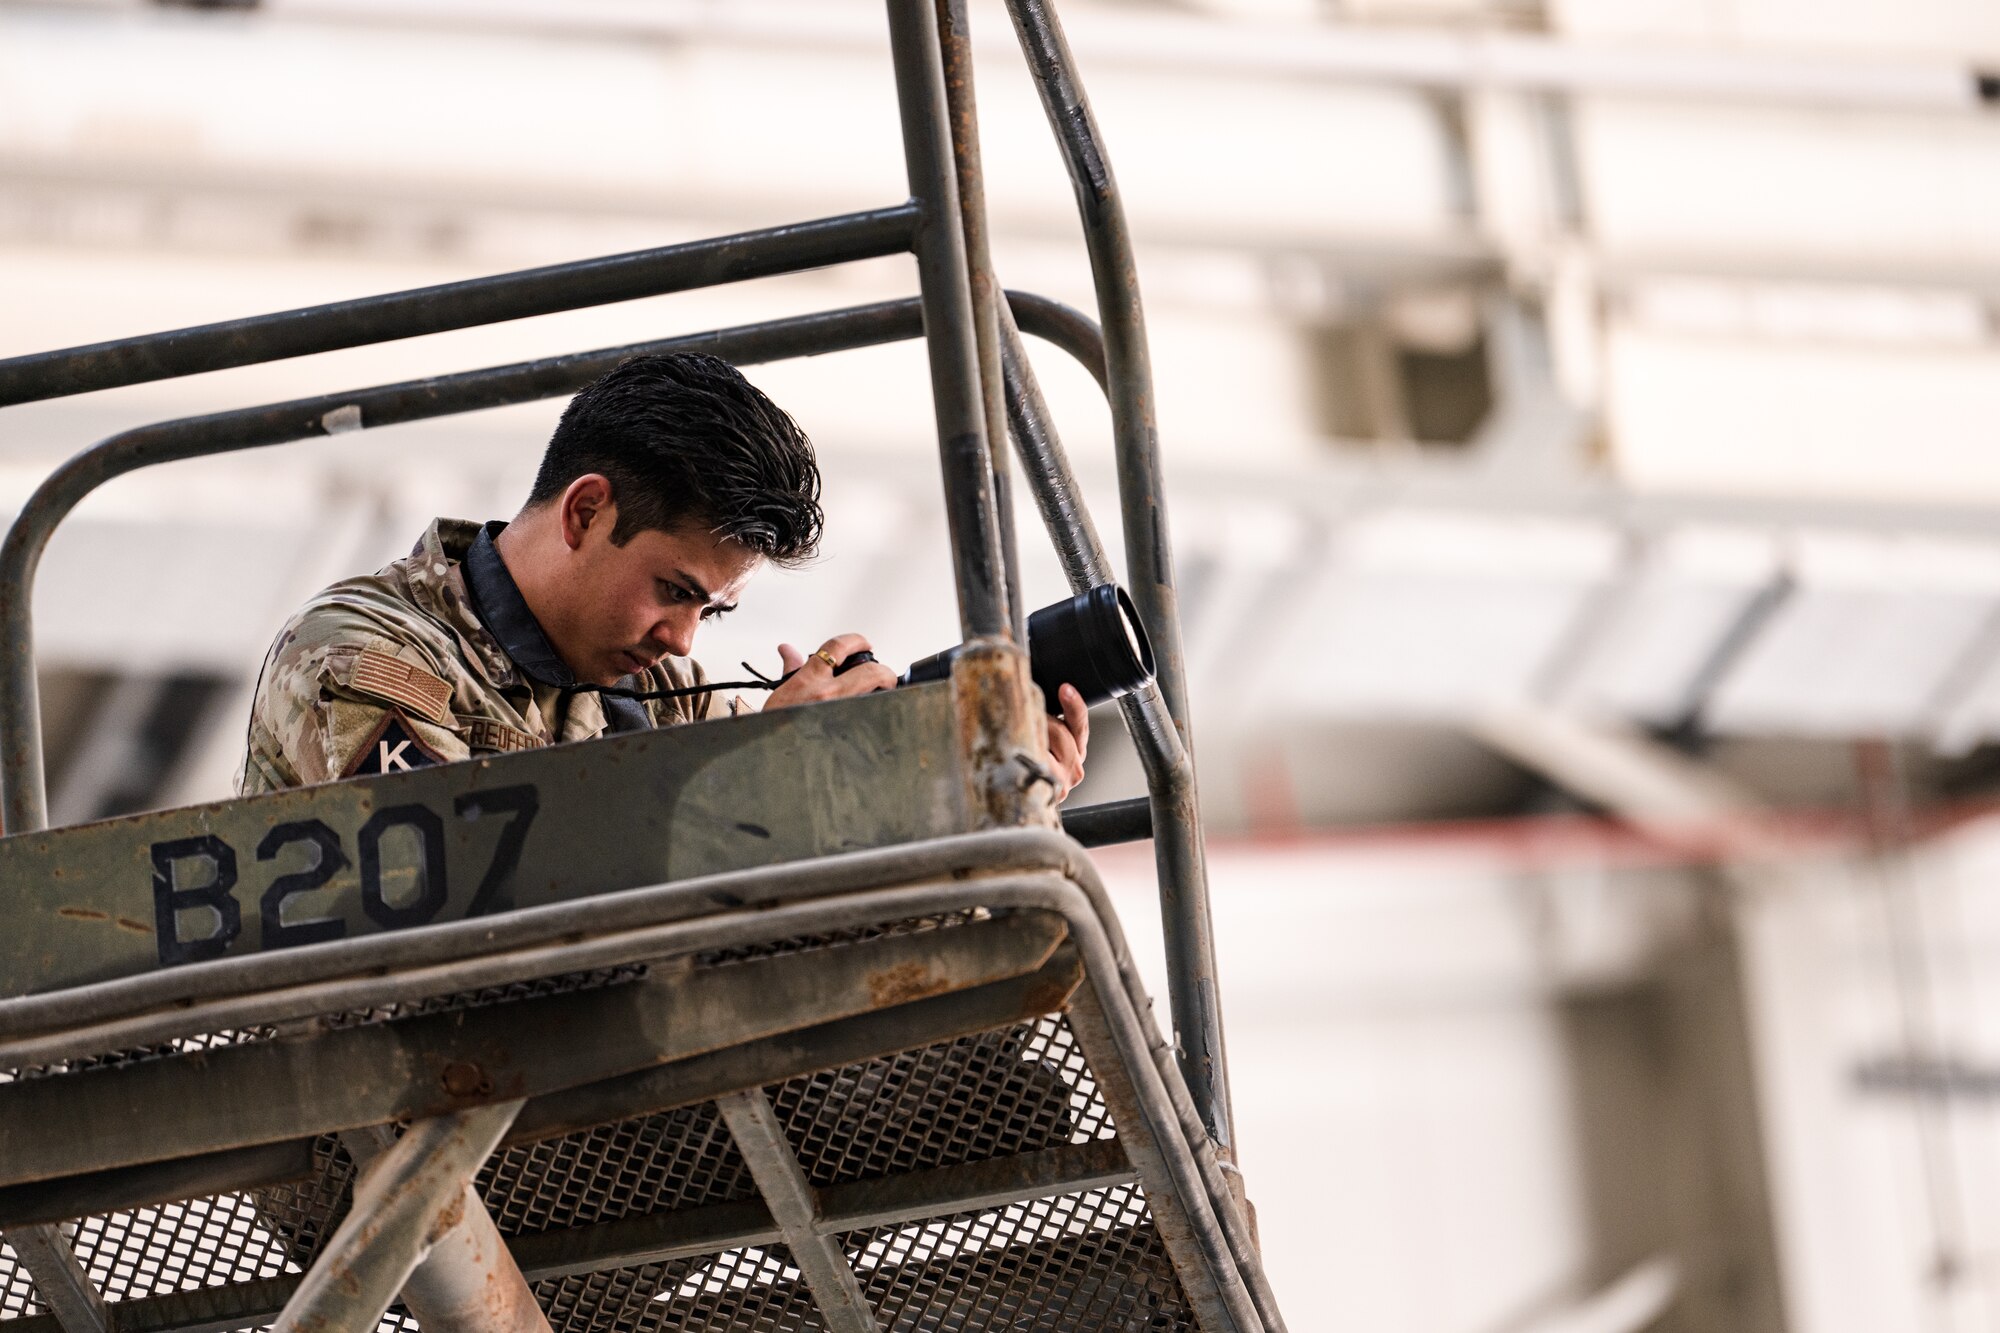 Airman photographing from a maintenance stand